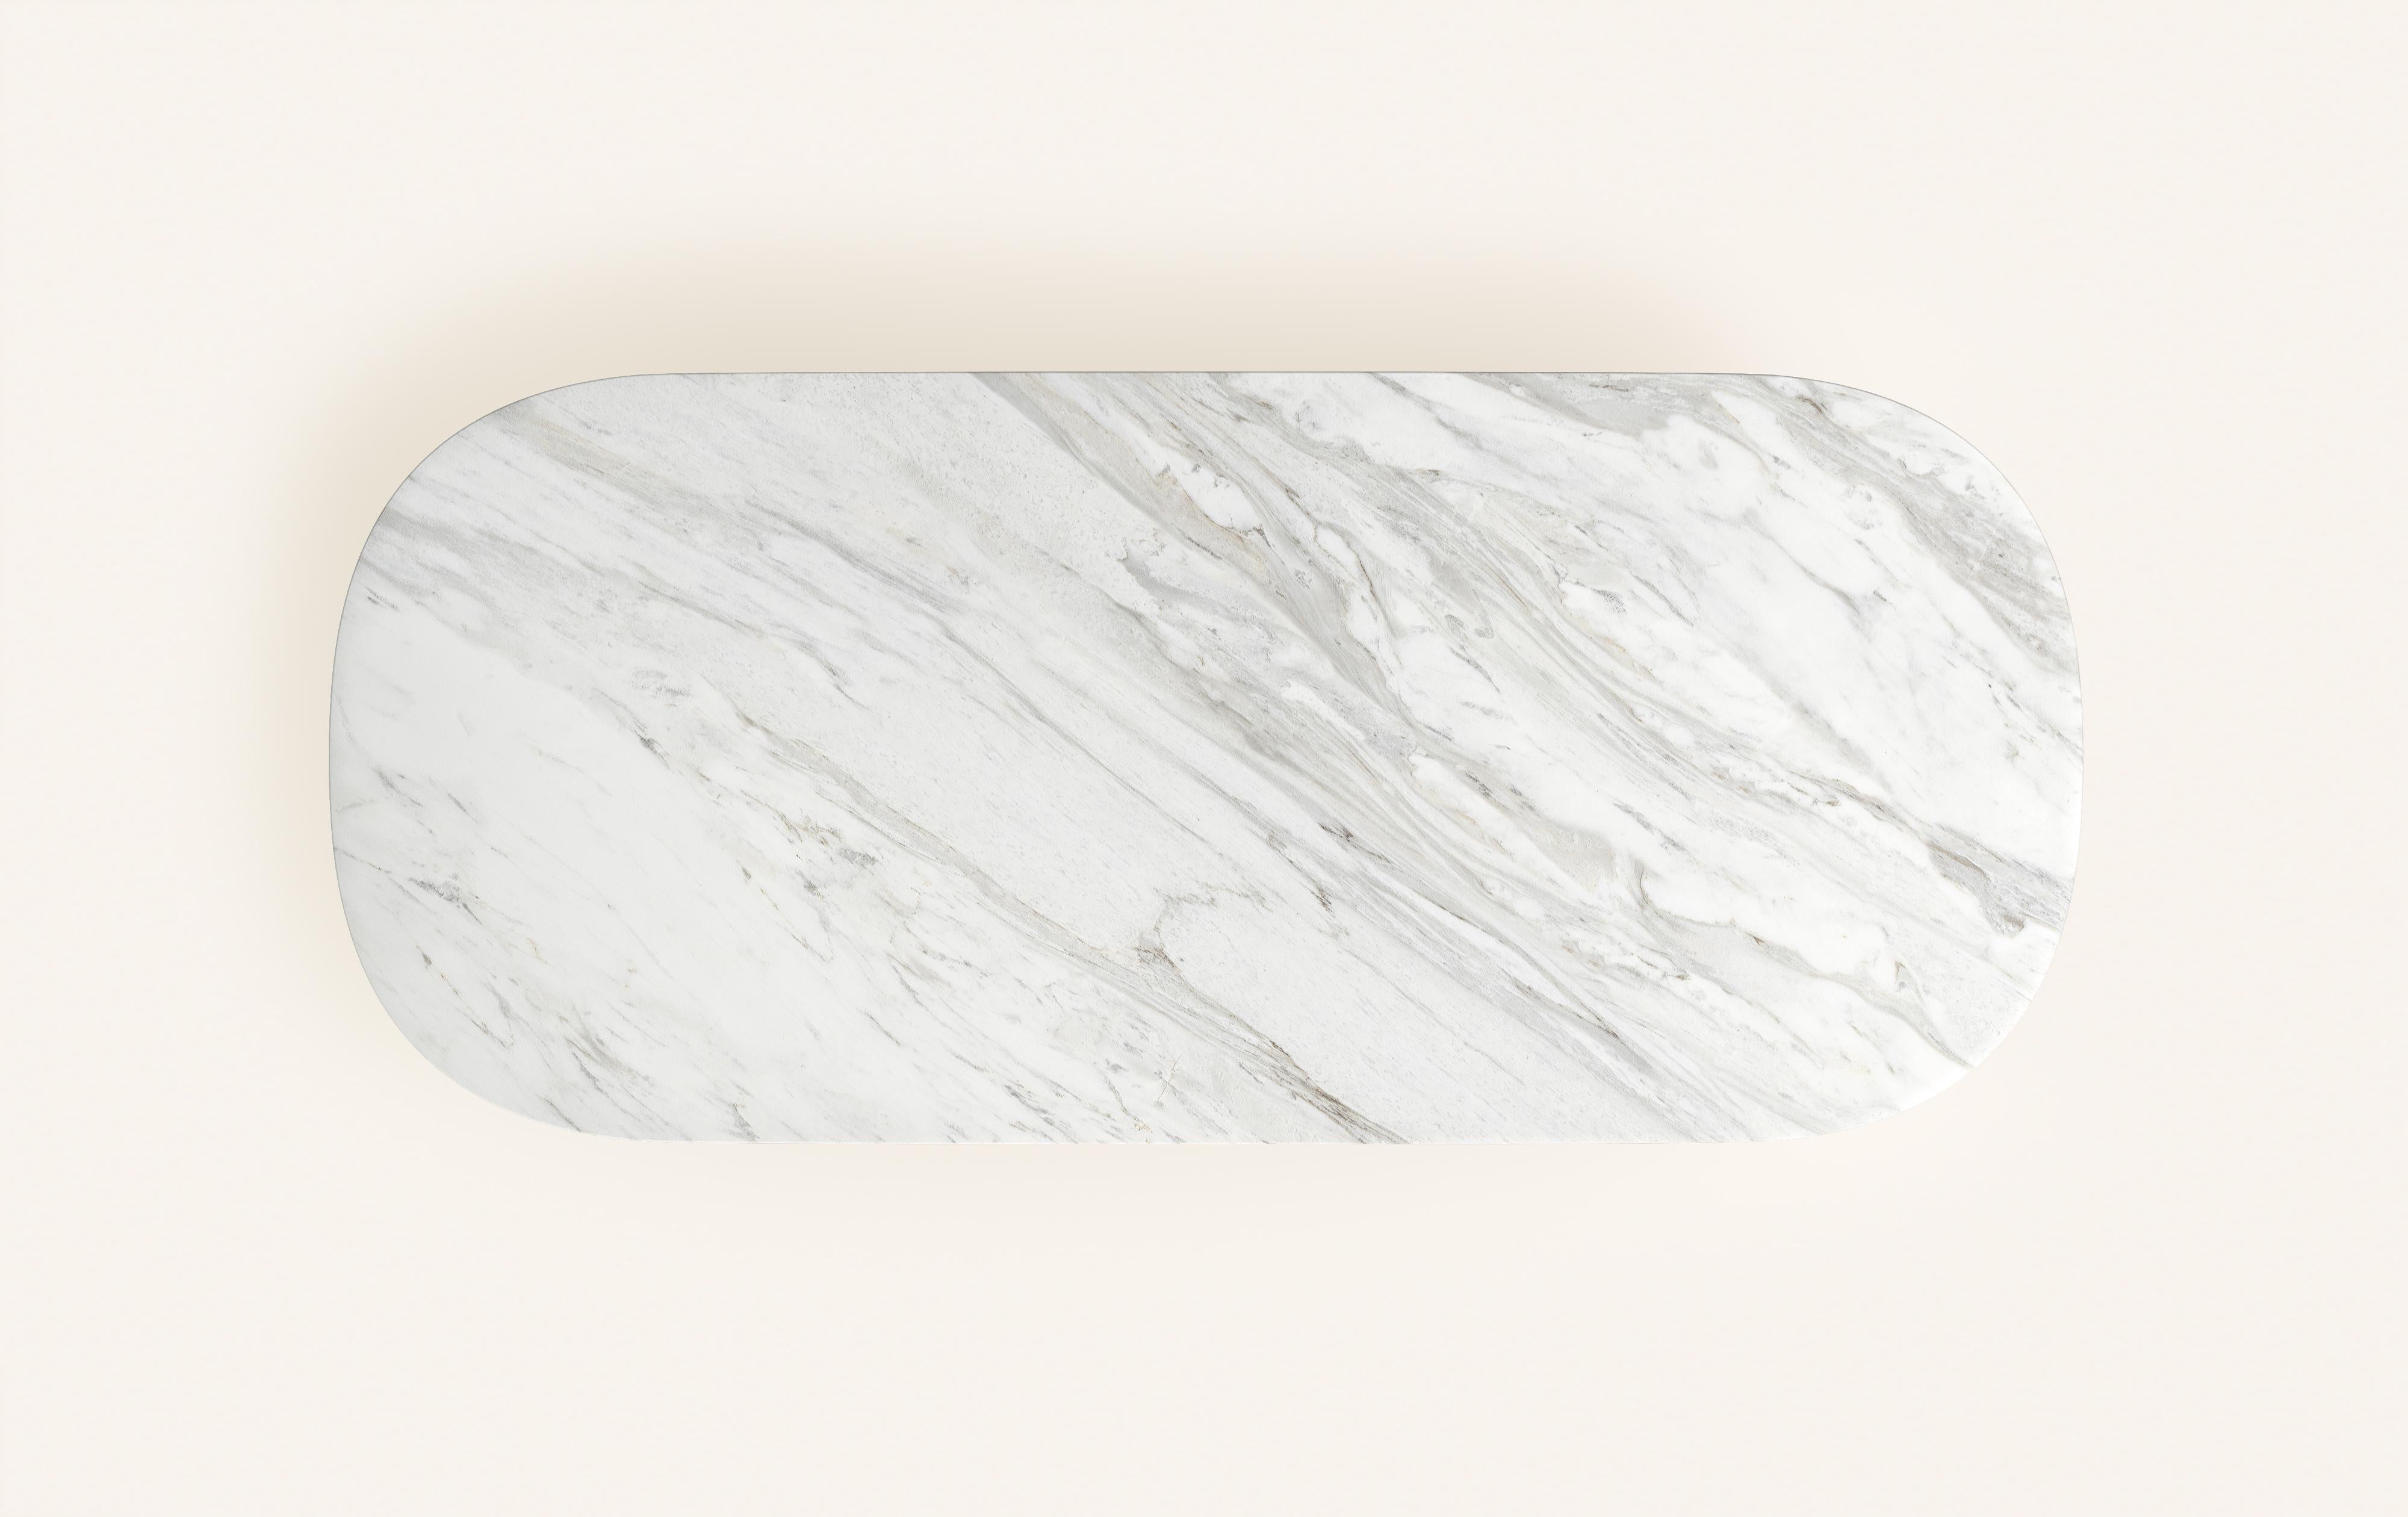 FORM(LA) Cono Oval Dining Table 118”L x 48”W x 30”H Volakas White Marble In New Condition For Sale In Los Angeles, CA